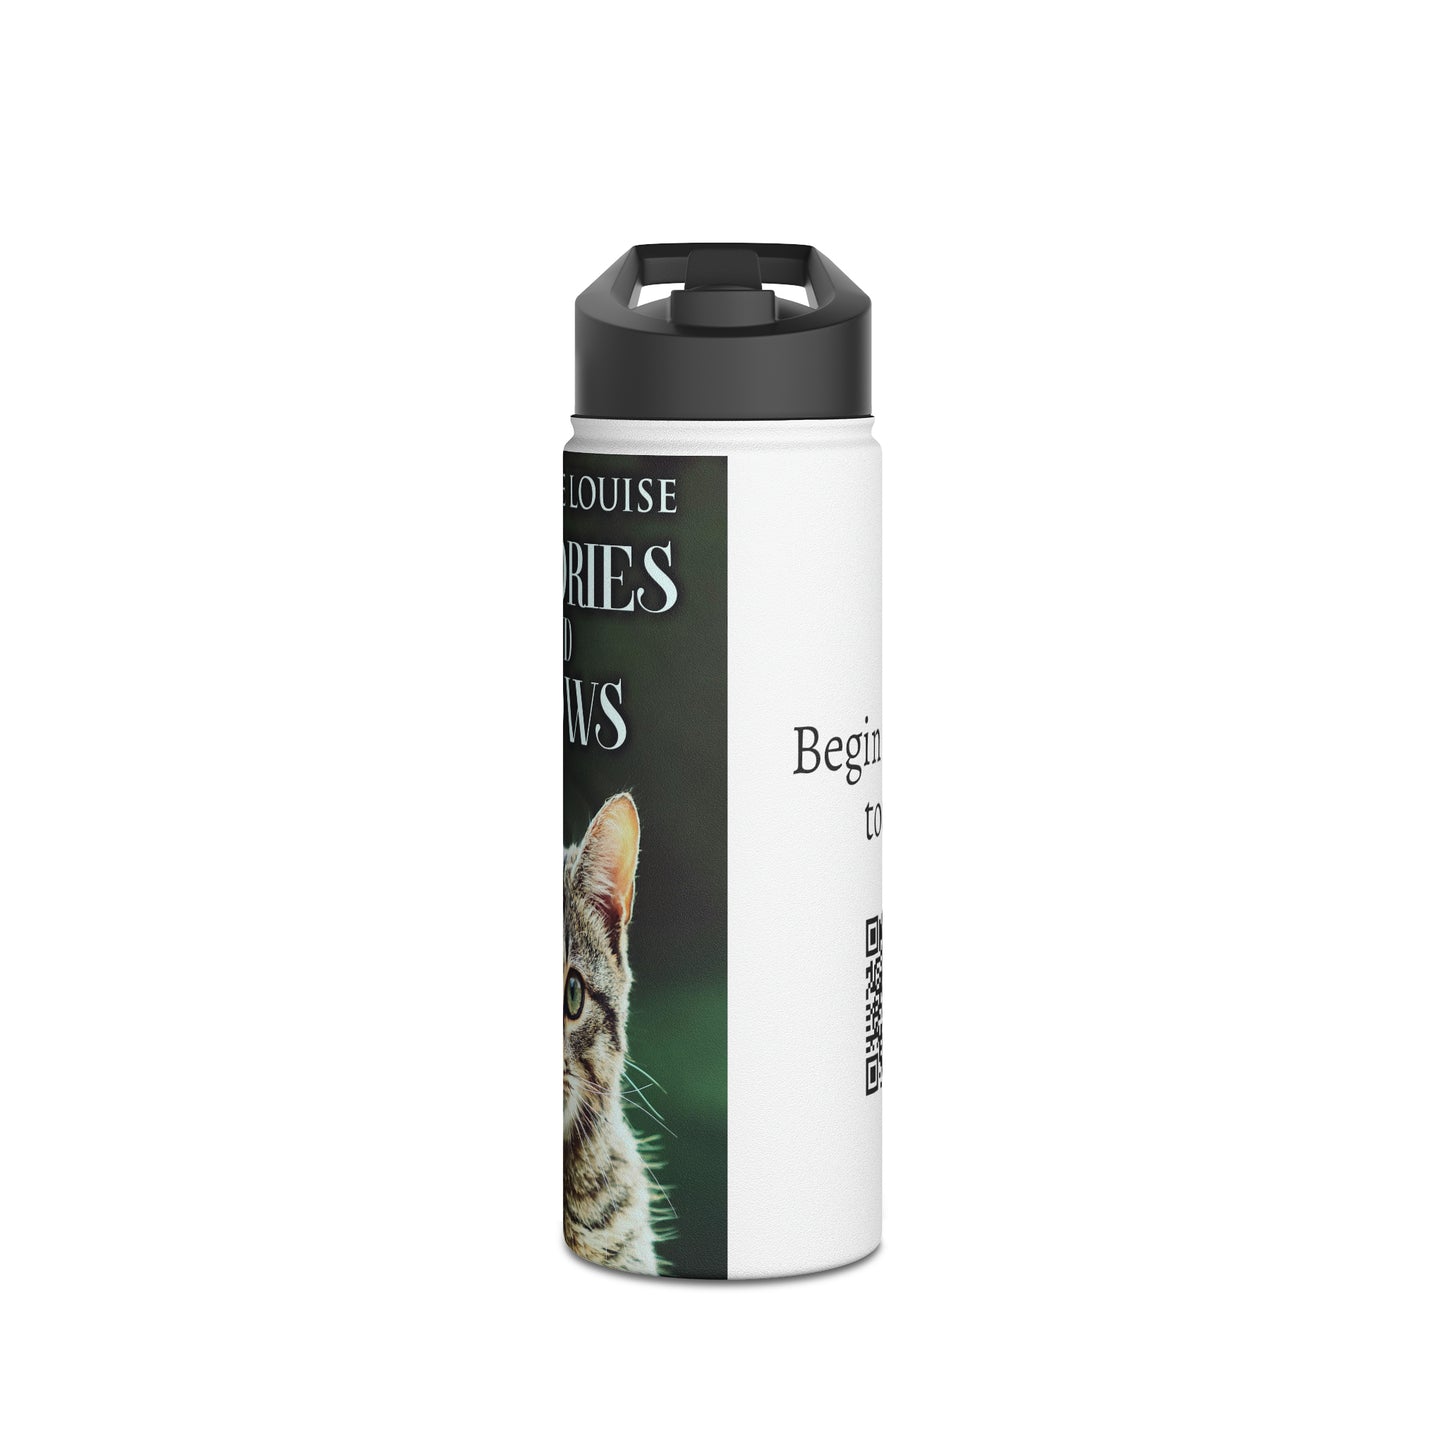 Memories And Meows - Stainless Steel Water Bottle